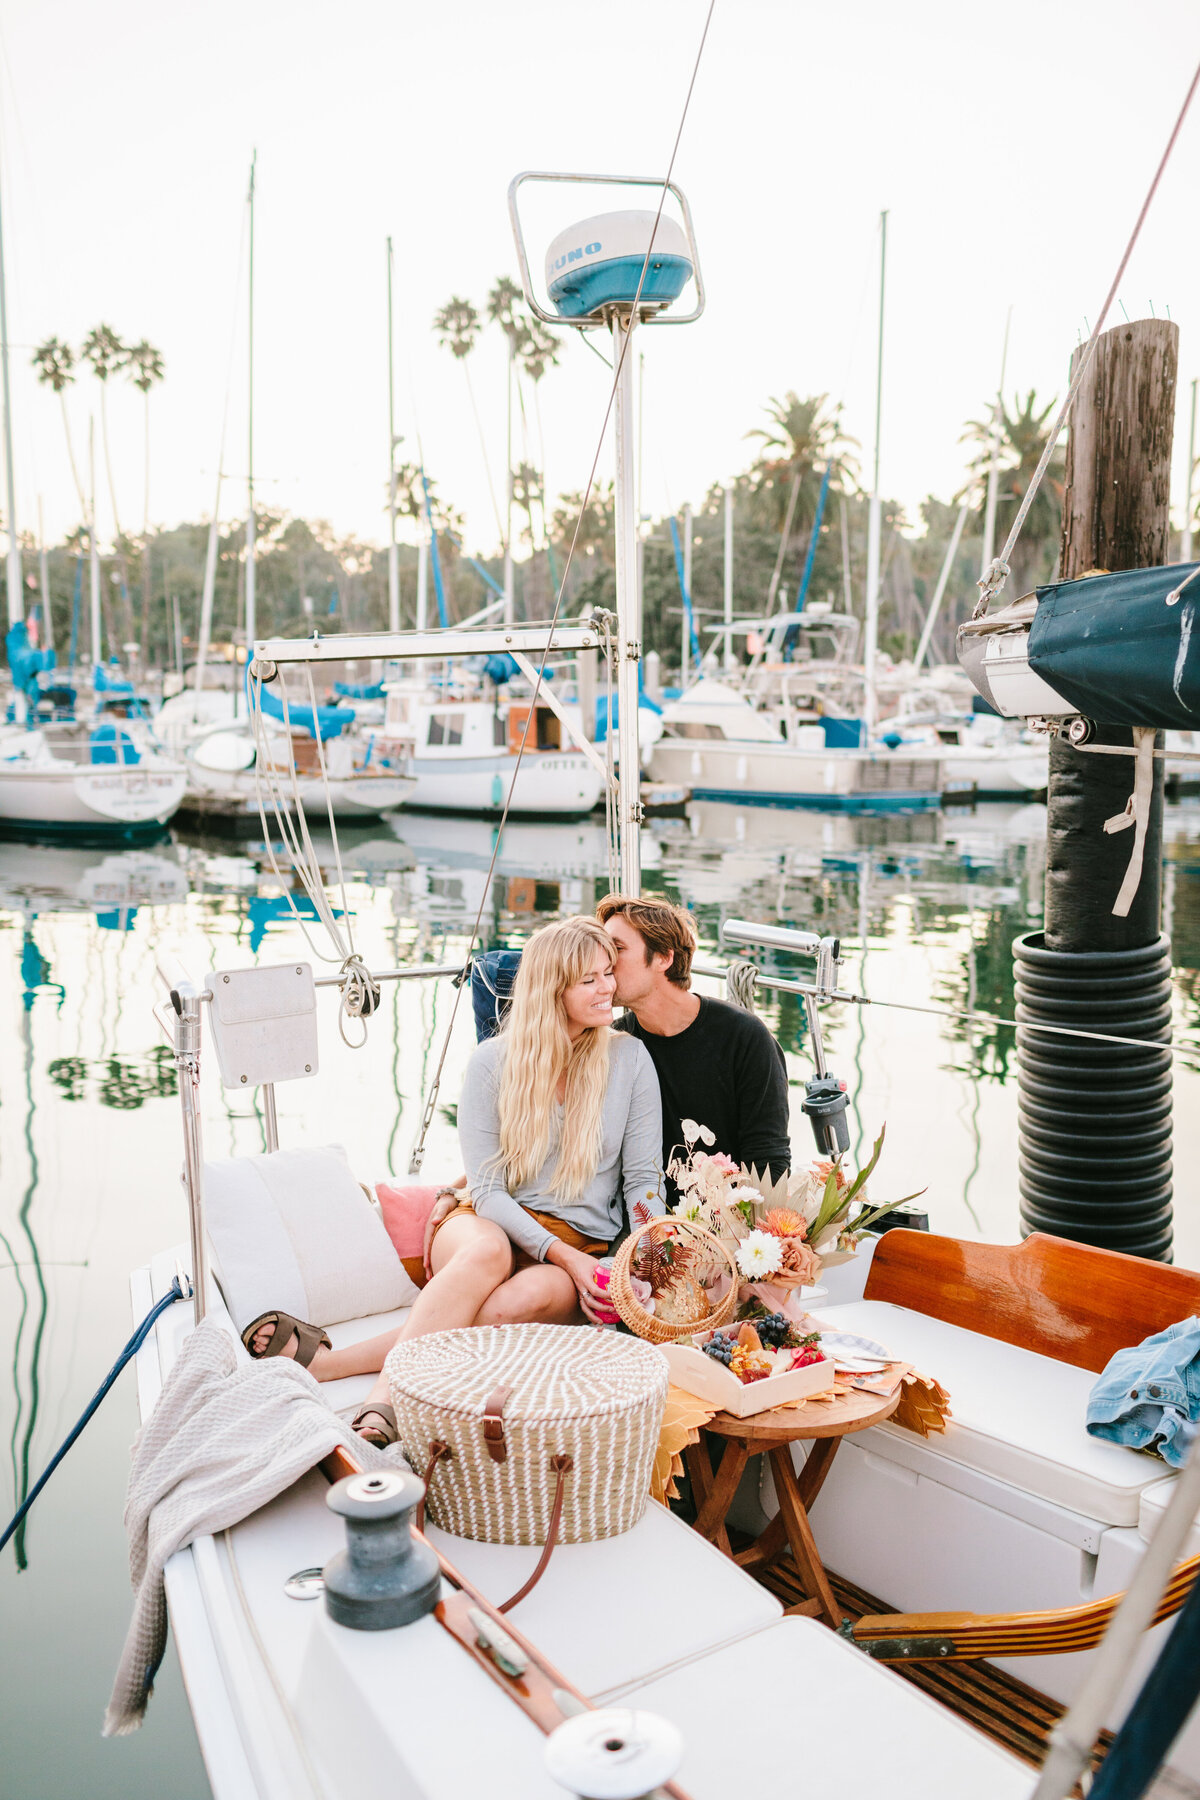 Best California and Texas Engagement Photographer-Jodee Debes Photography-275